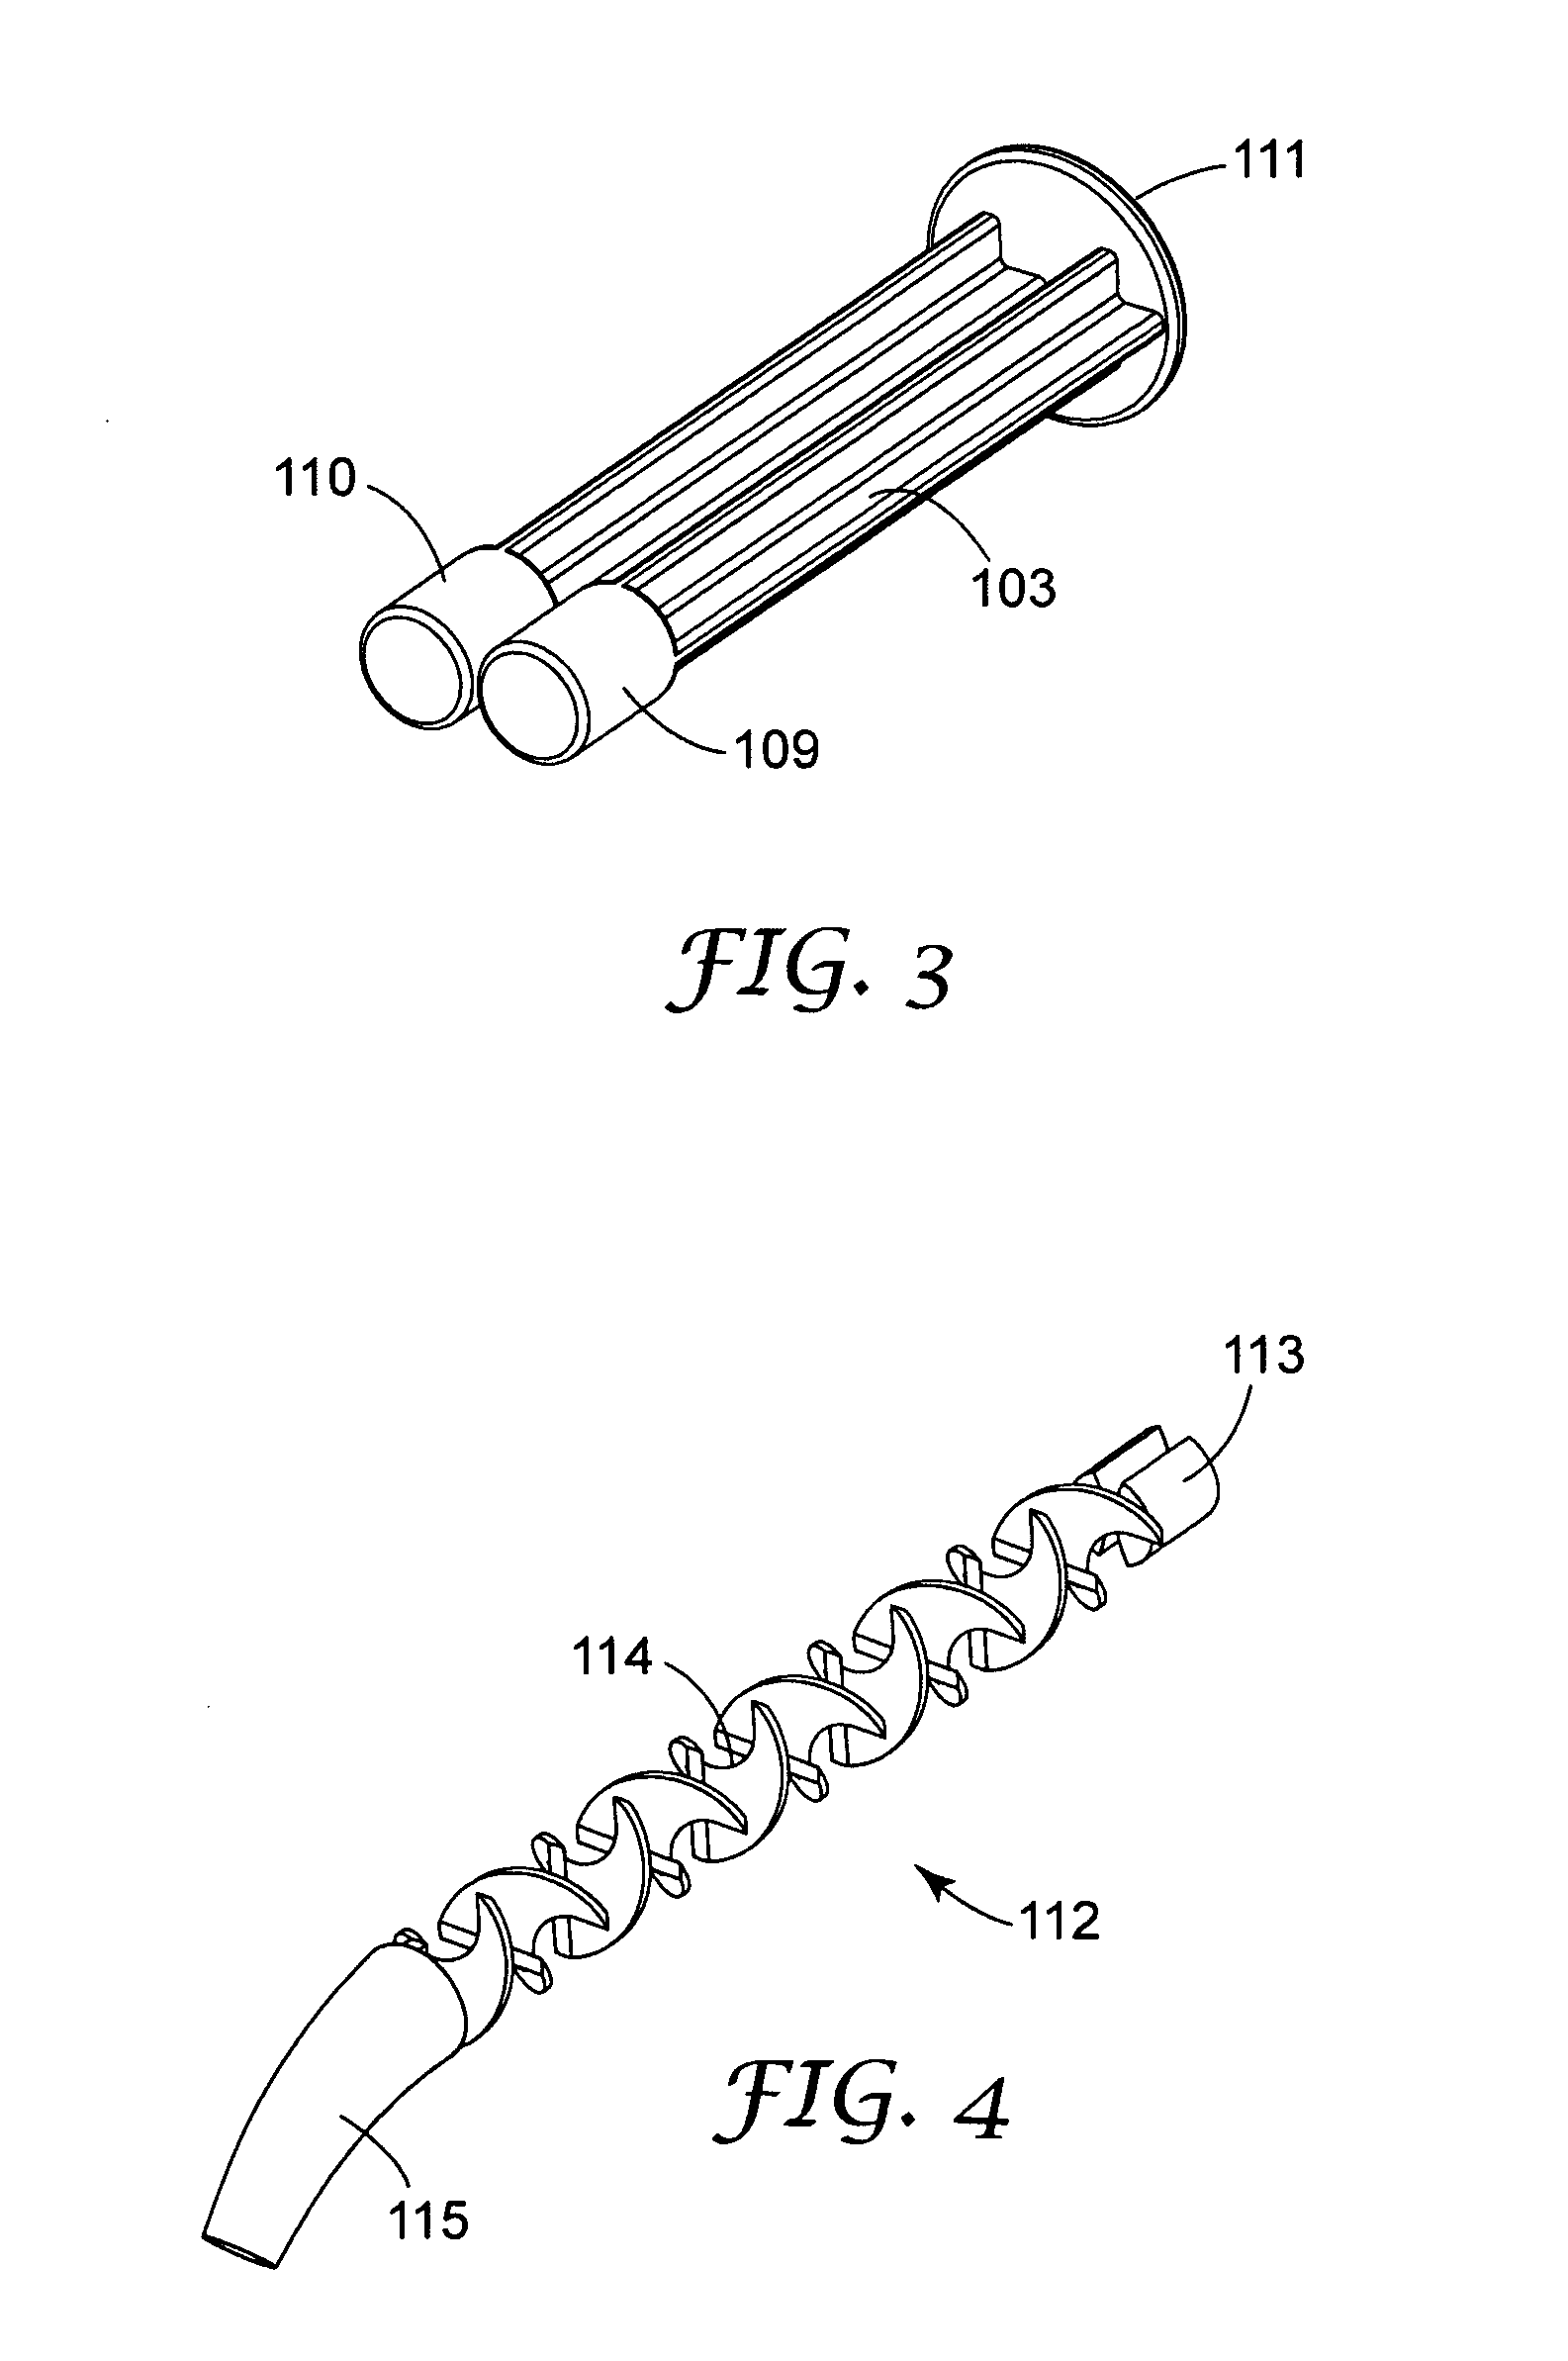 Unit-dose syringe for a multi-component material